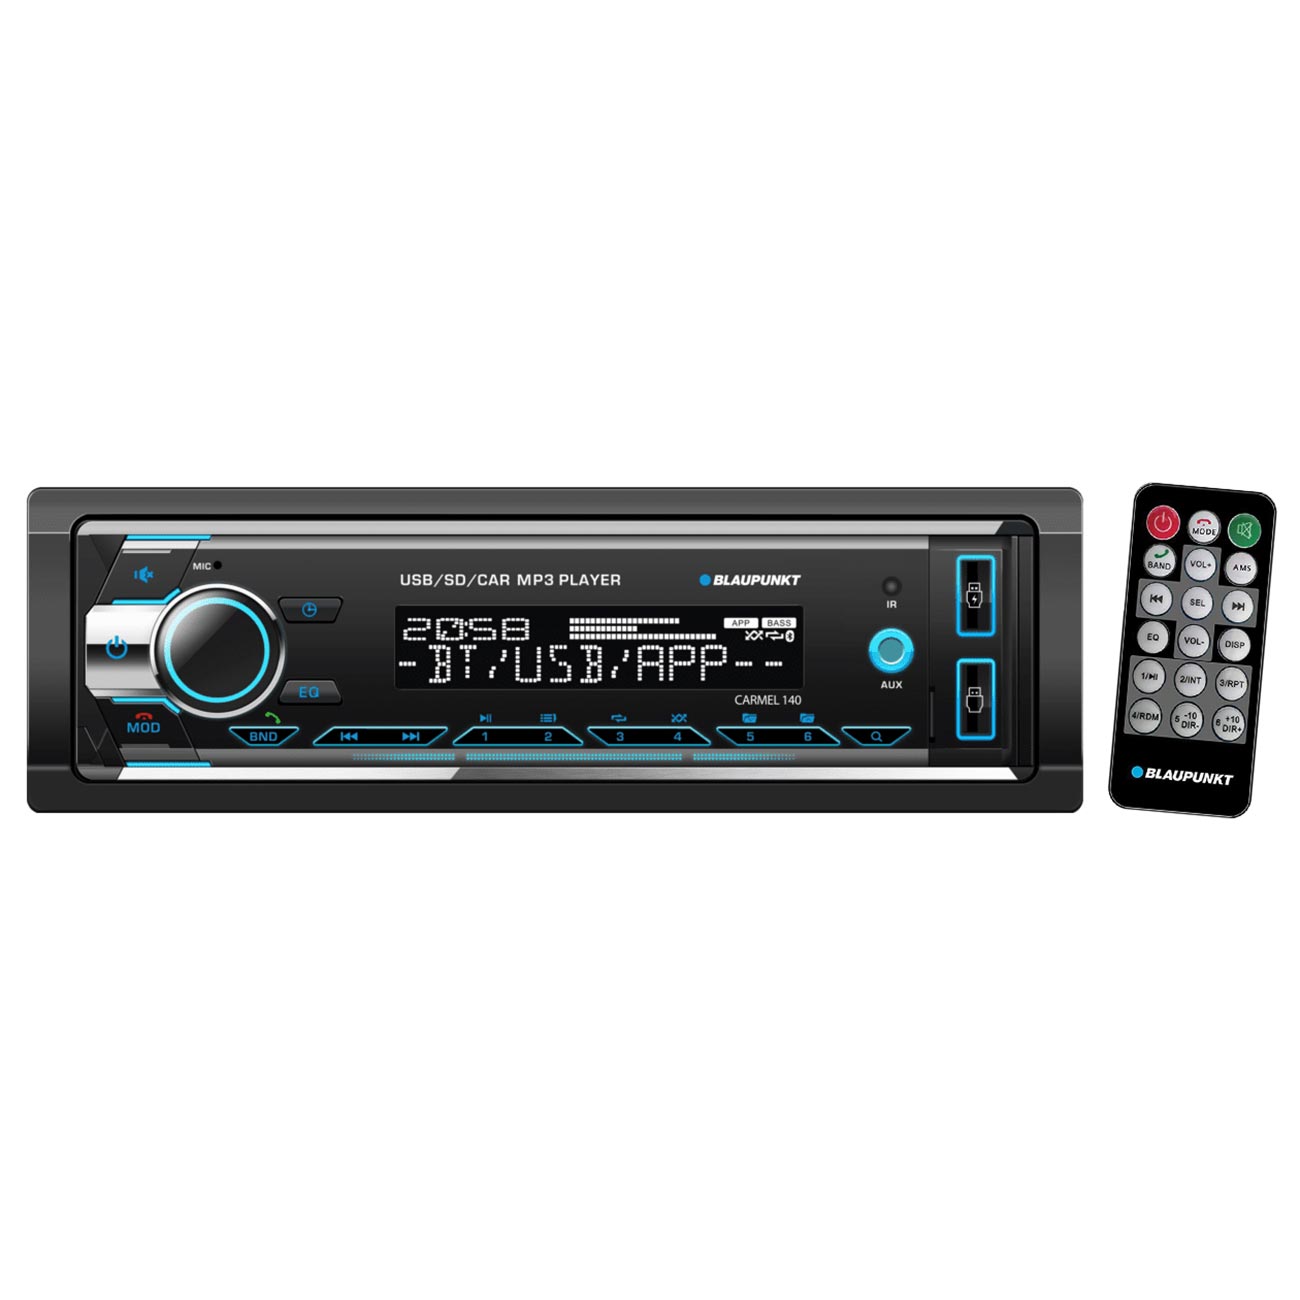 Blaupunkt Detachable Face Mechless AM/FM Receiver with Bluetooth USB/SD Inputs & Remote